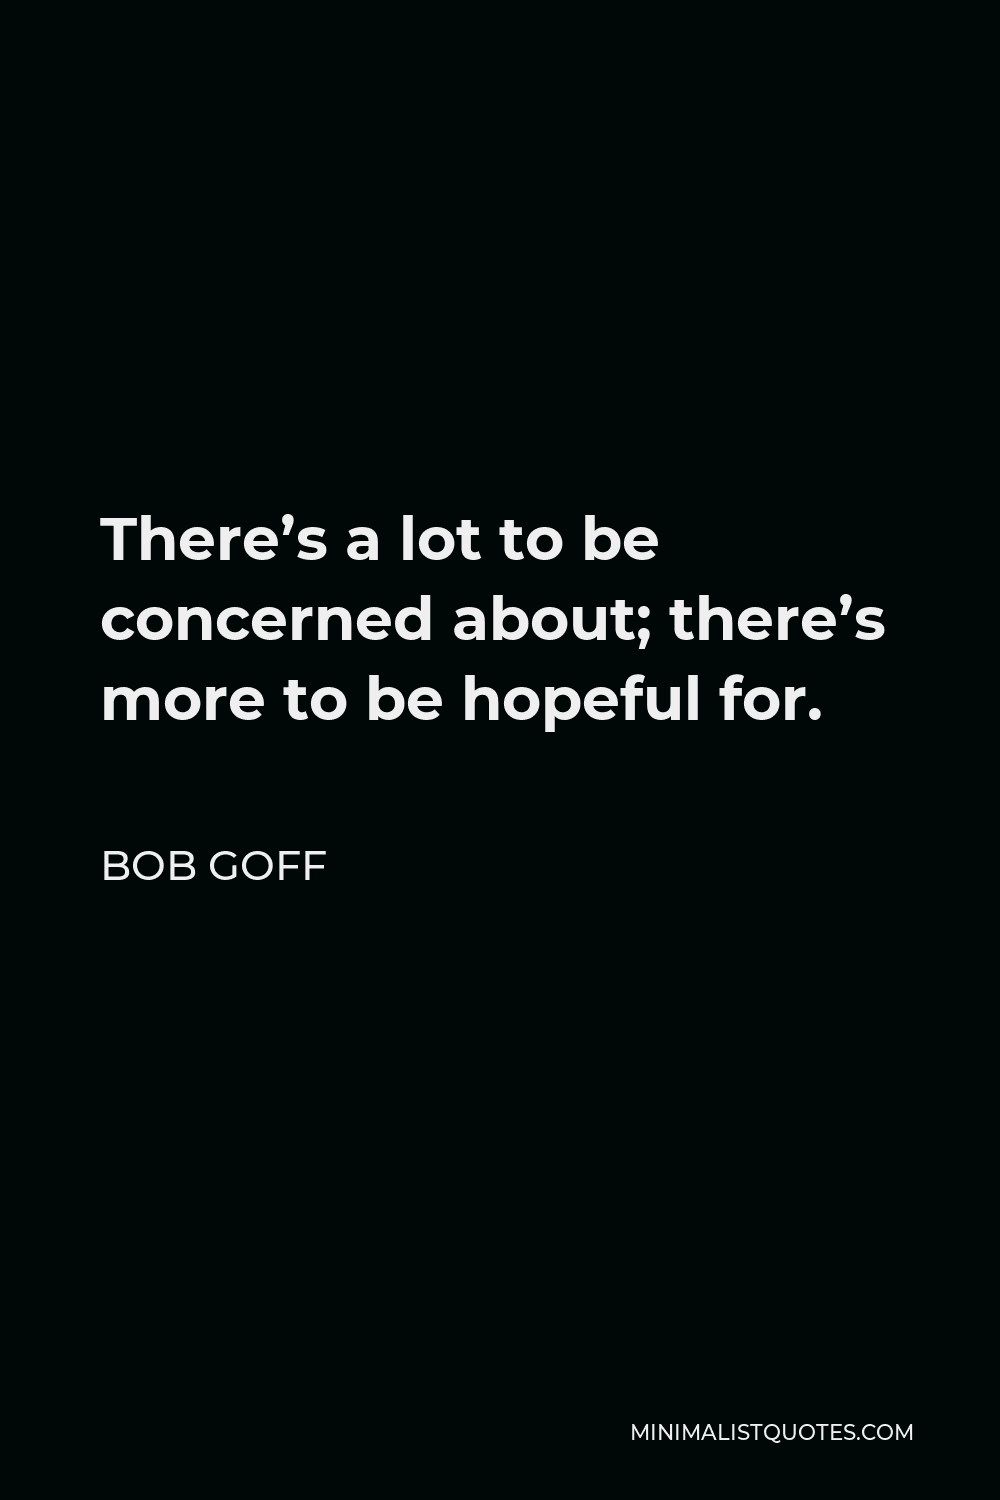 Bob Goff Quote - There’s a lot to be concerned about; there’s more to be hopeful for.